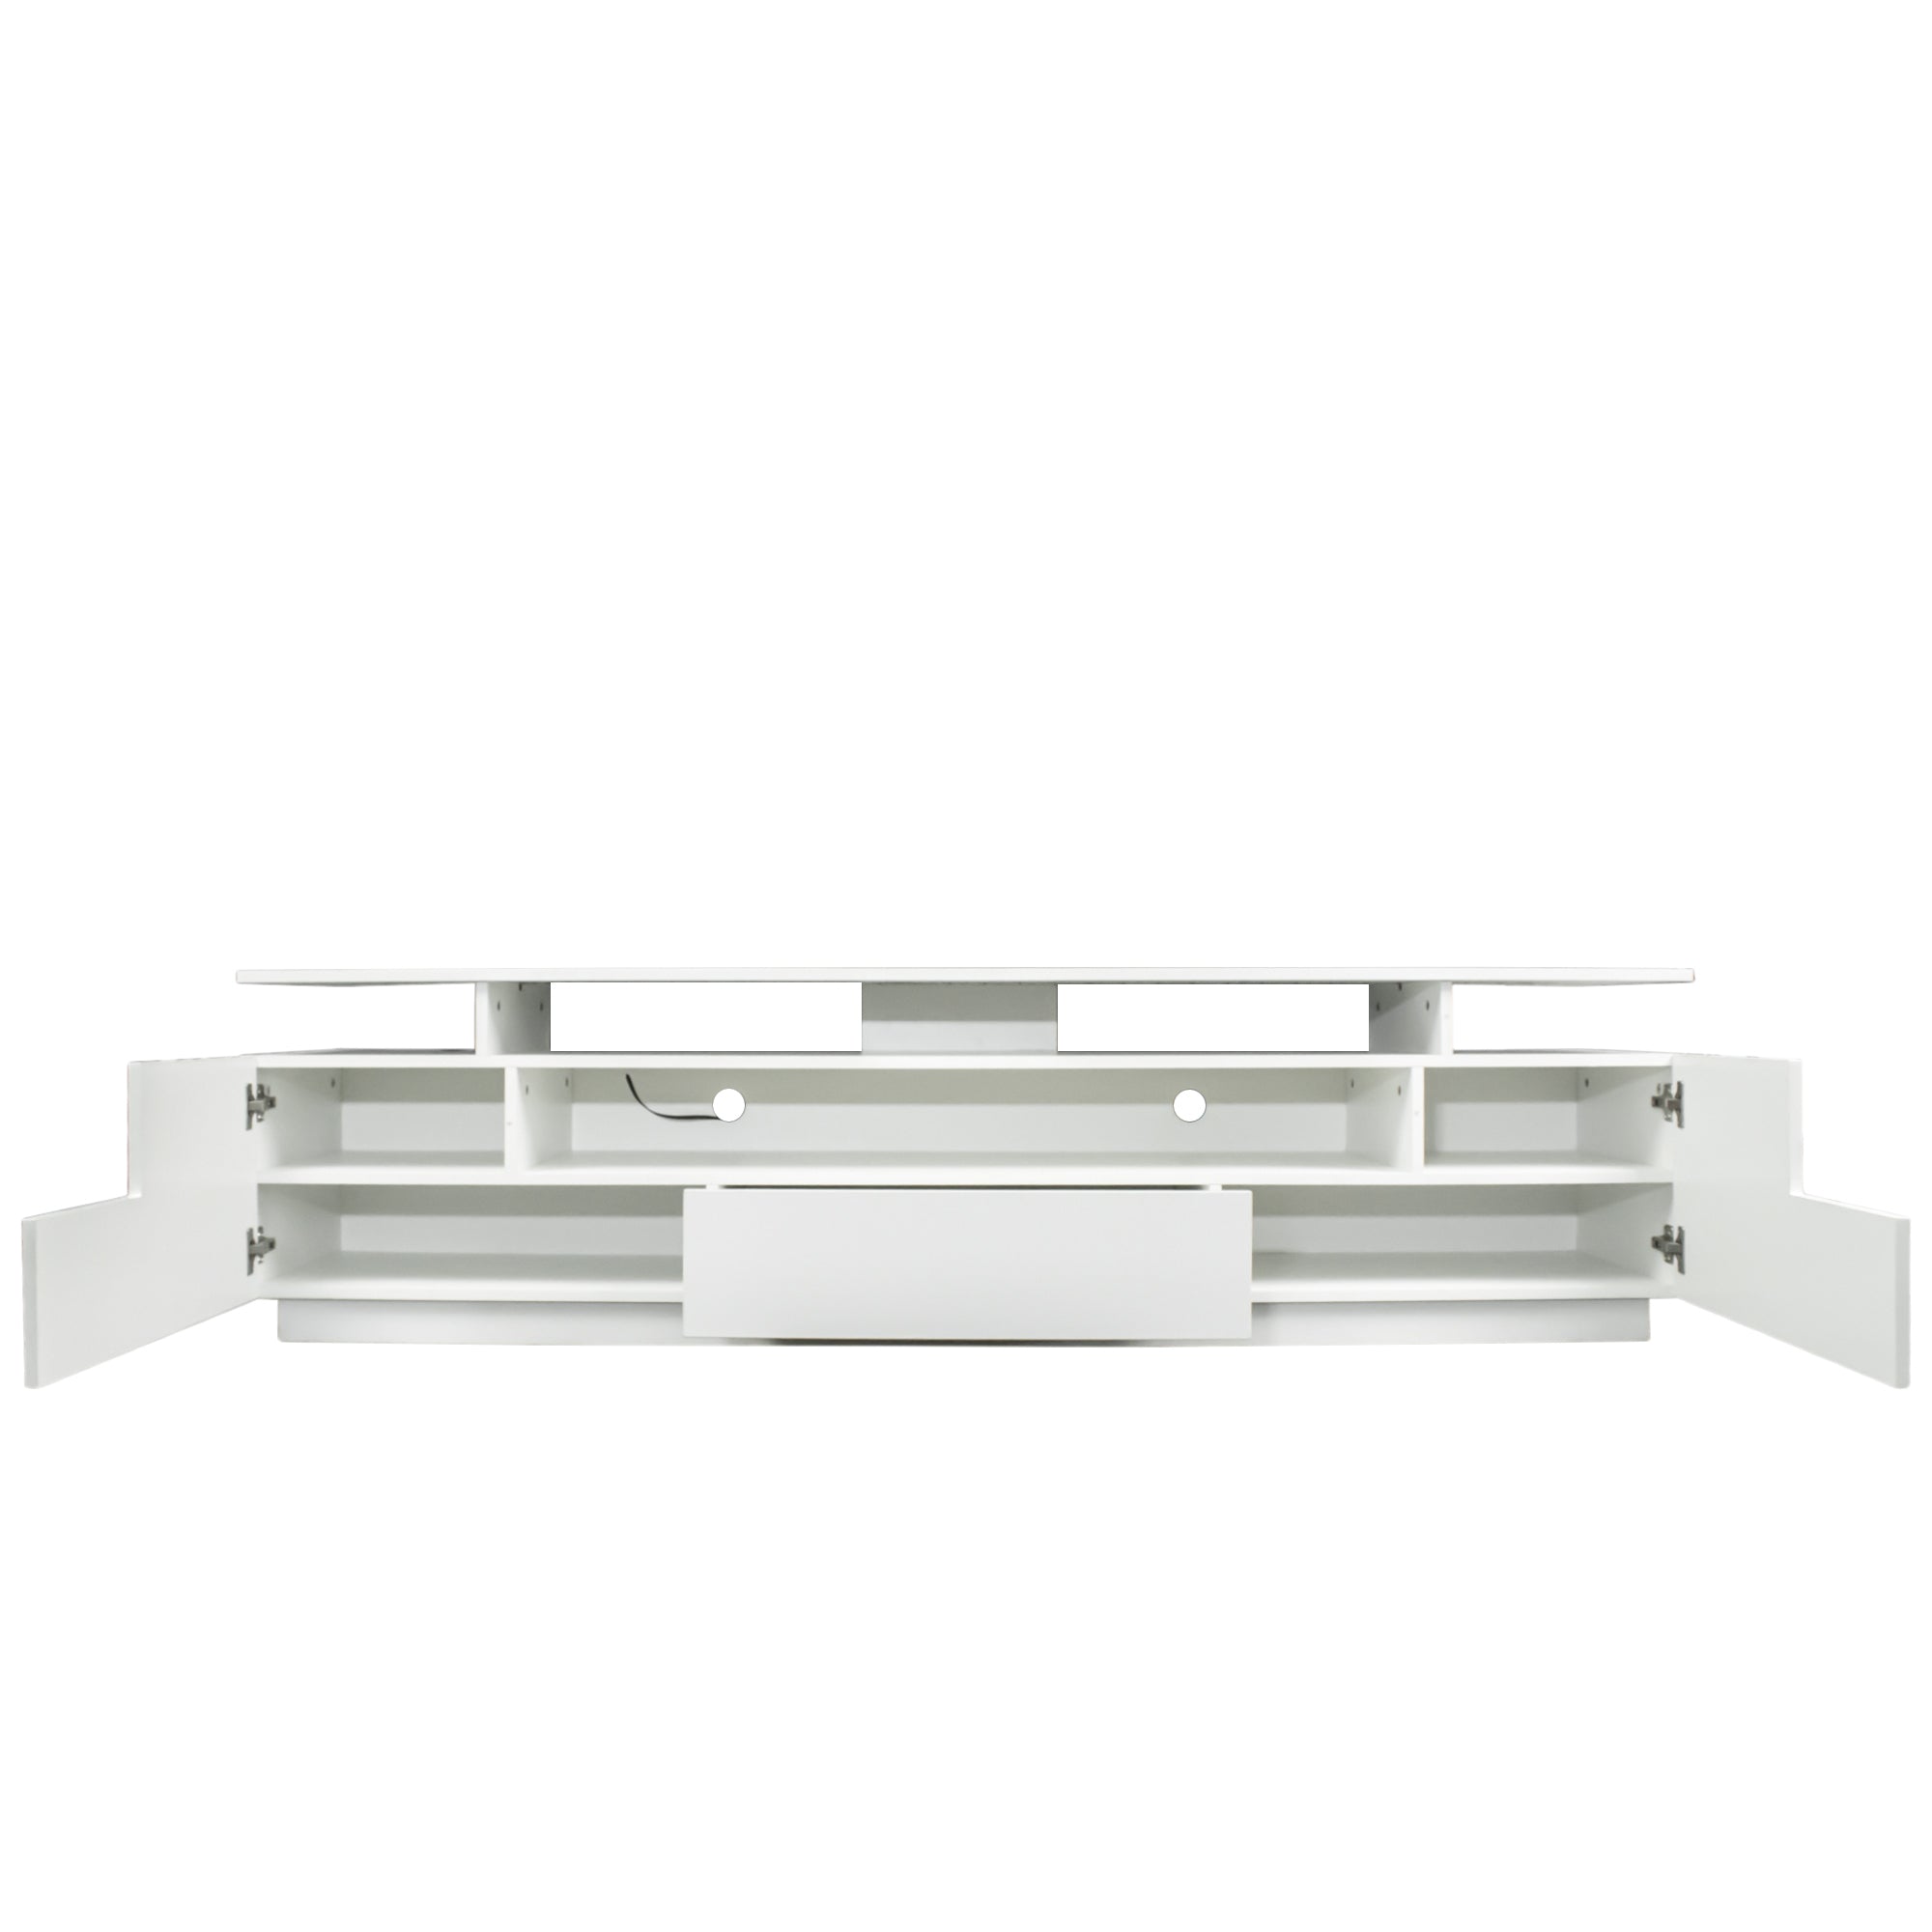 76.77" Modern White TV Stand  for TV up to 86", 20 Colors LED TV Stand w/Remote Control Lights